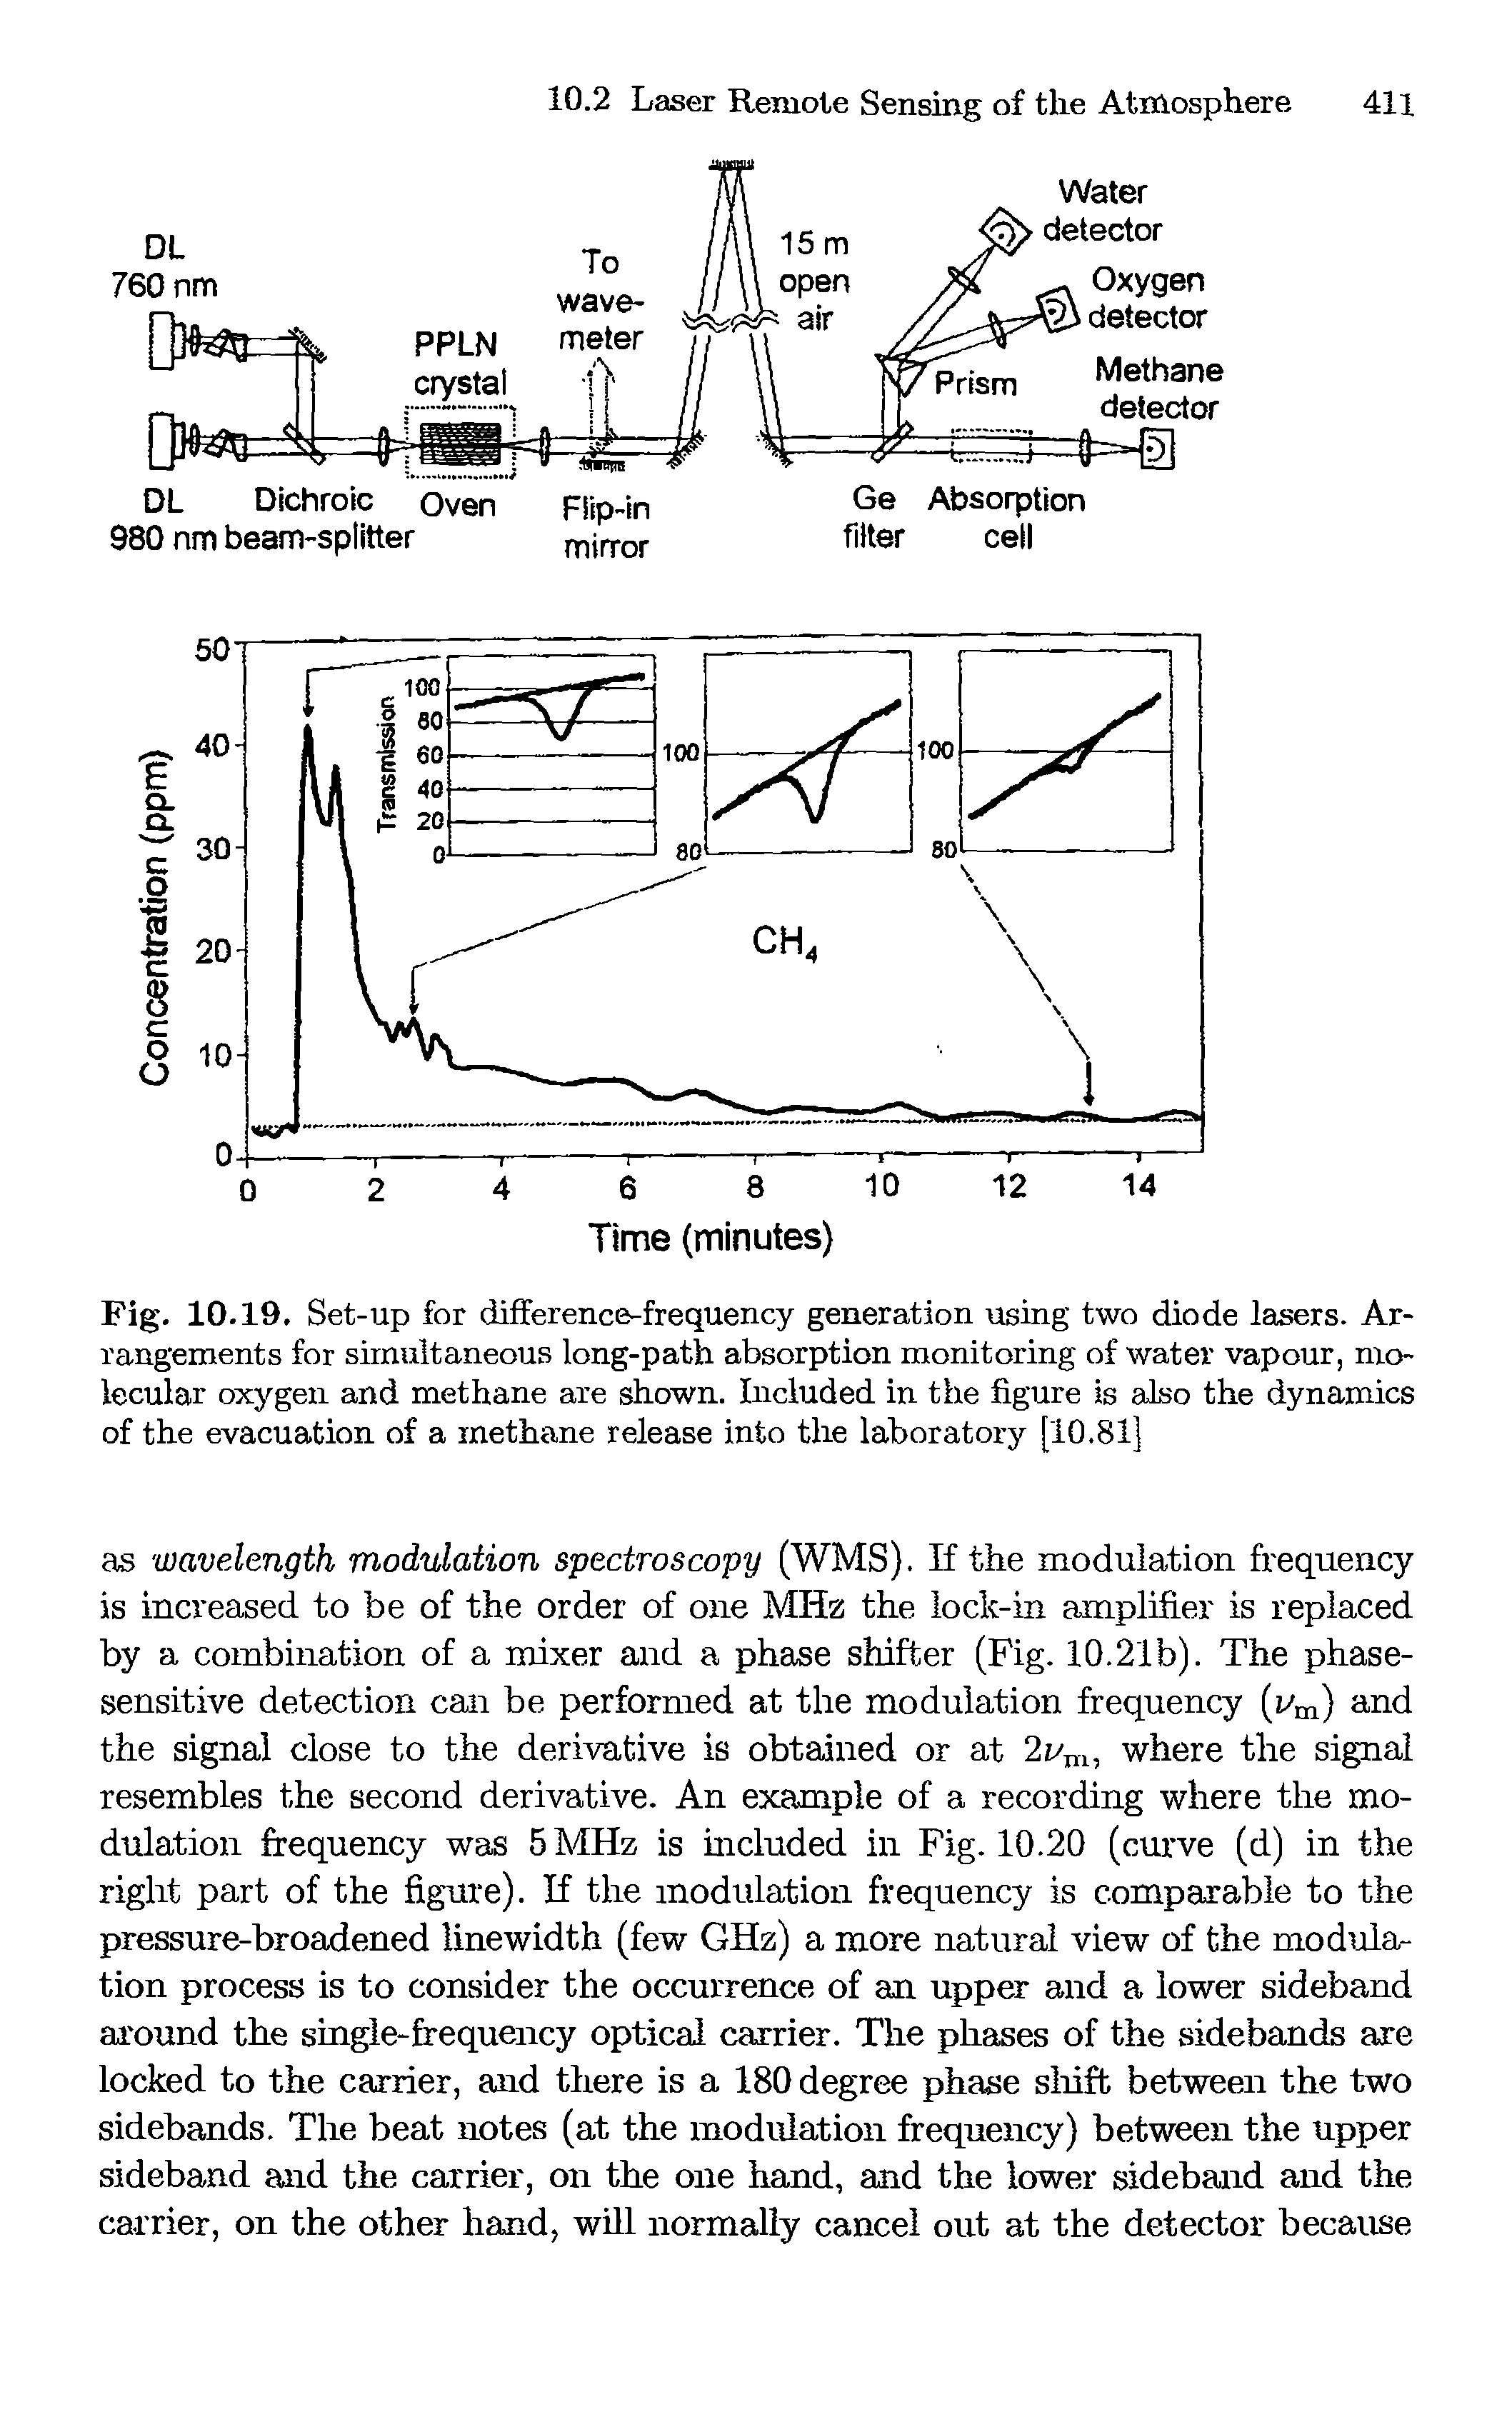 Fig. 10.19, Set-up for difference-frequency generation using two diode lasers. Arrangements for simultaneous long-path absorption monitoring of water vapour, molecular oxygen and methane are shown. Included in the figure is also the dynamics of the evacuation of a methane release into the laboratory [10.81]...